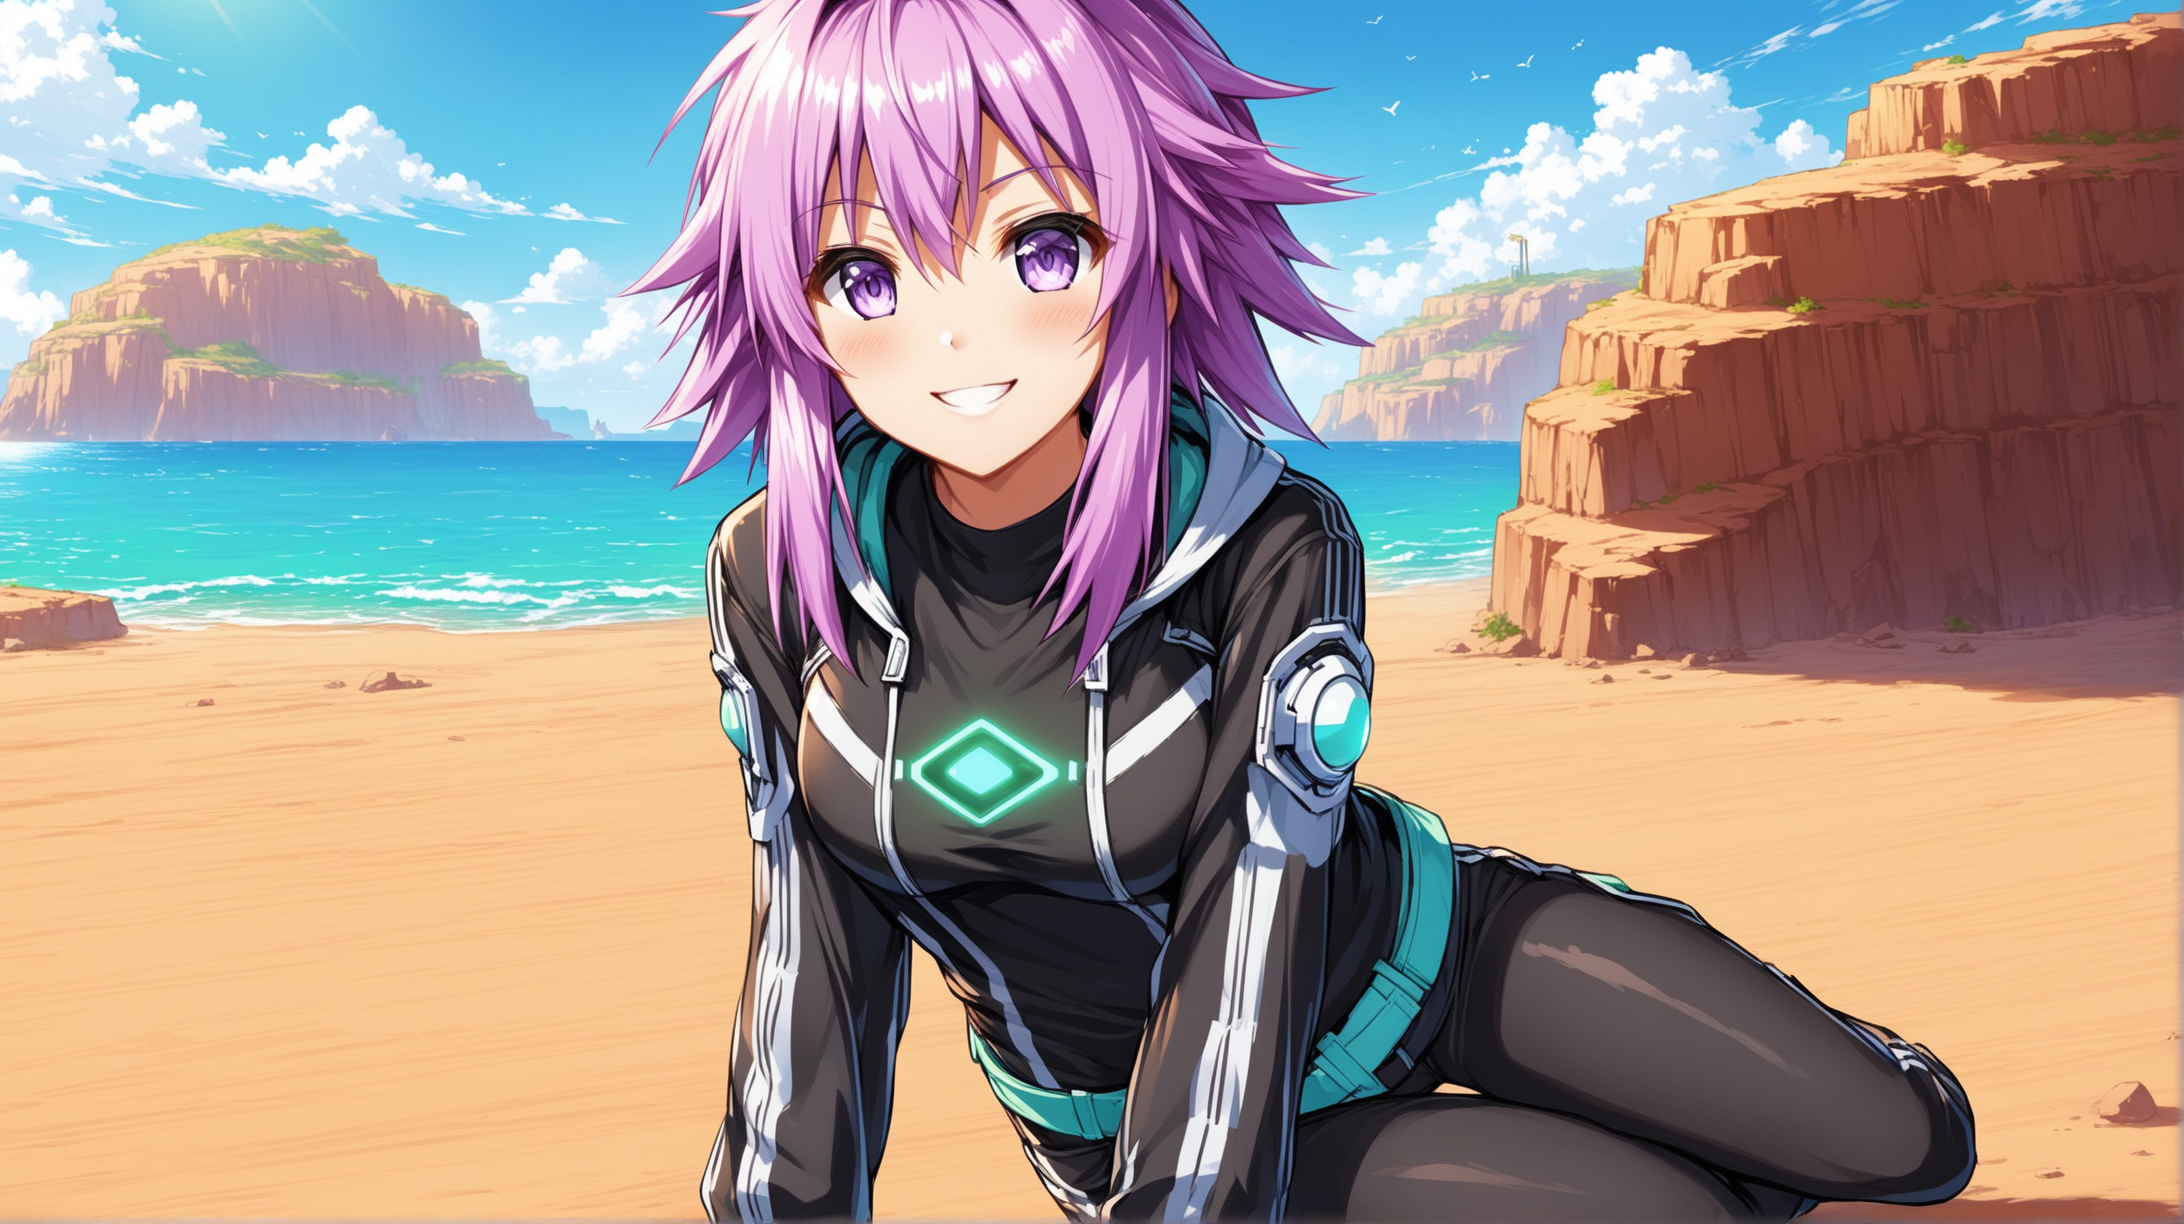 Draw the character Neptunia, high quality, outdoors, casual pose, in an outfit and setting inspired from the Fallout game series, smiling at the viewer